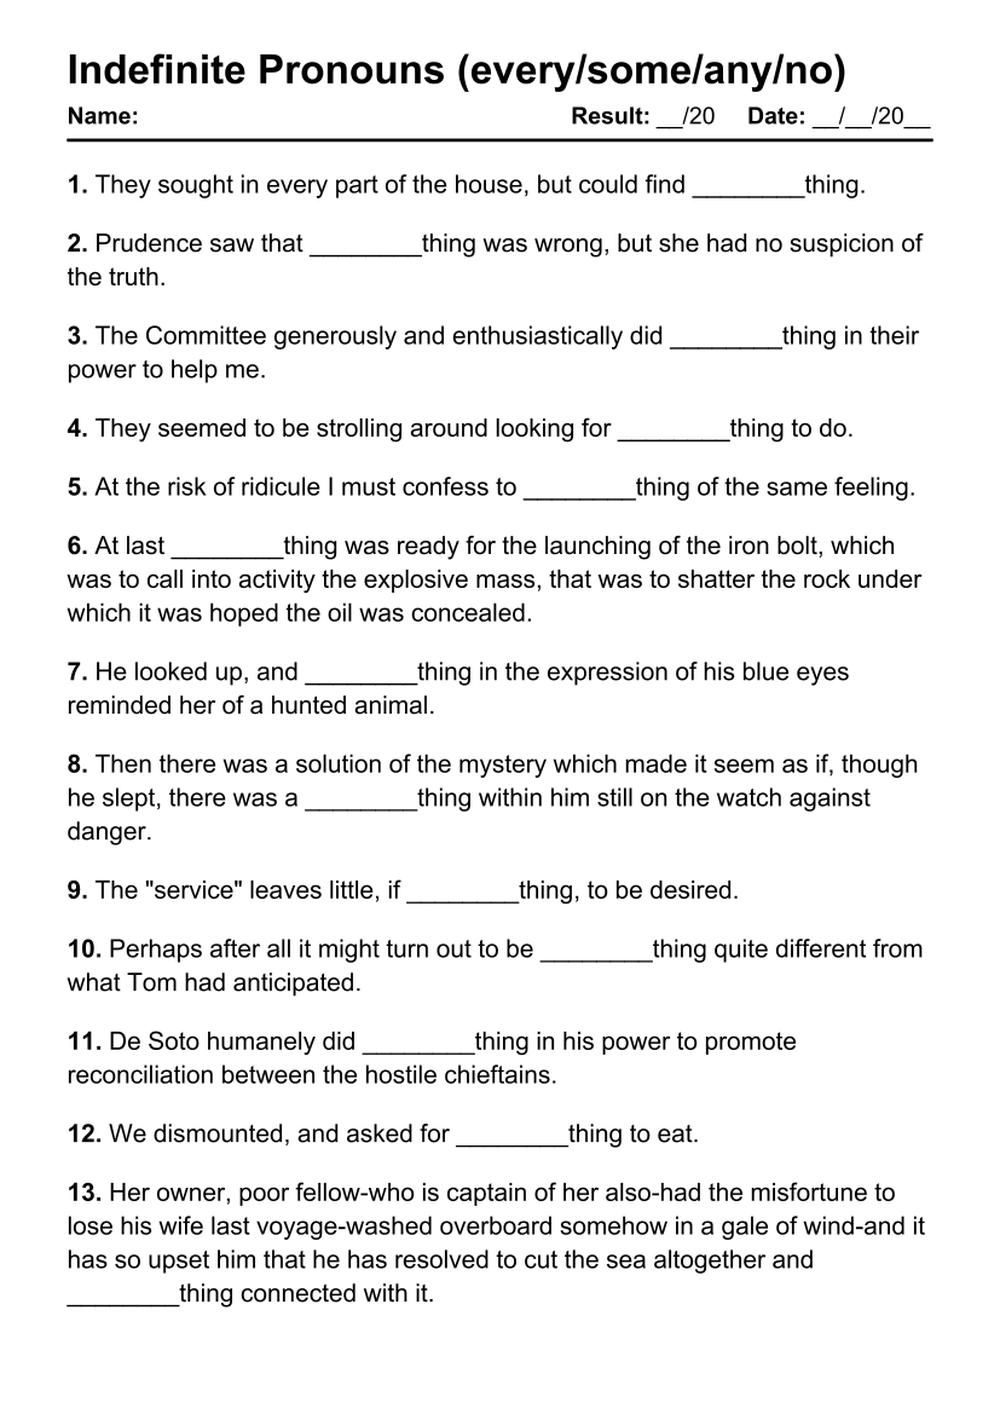 Printable Indefinite Pronouns Exercises - PDF Worksheet with Answers - Test 56